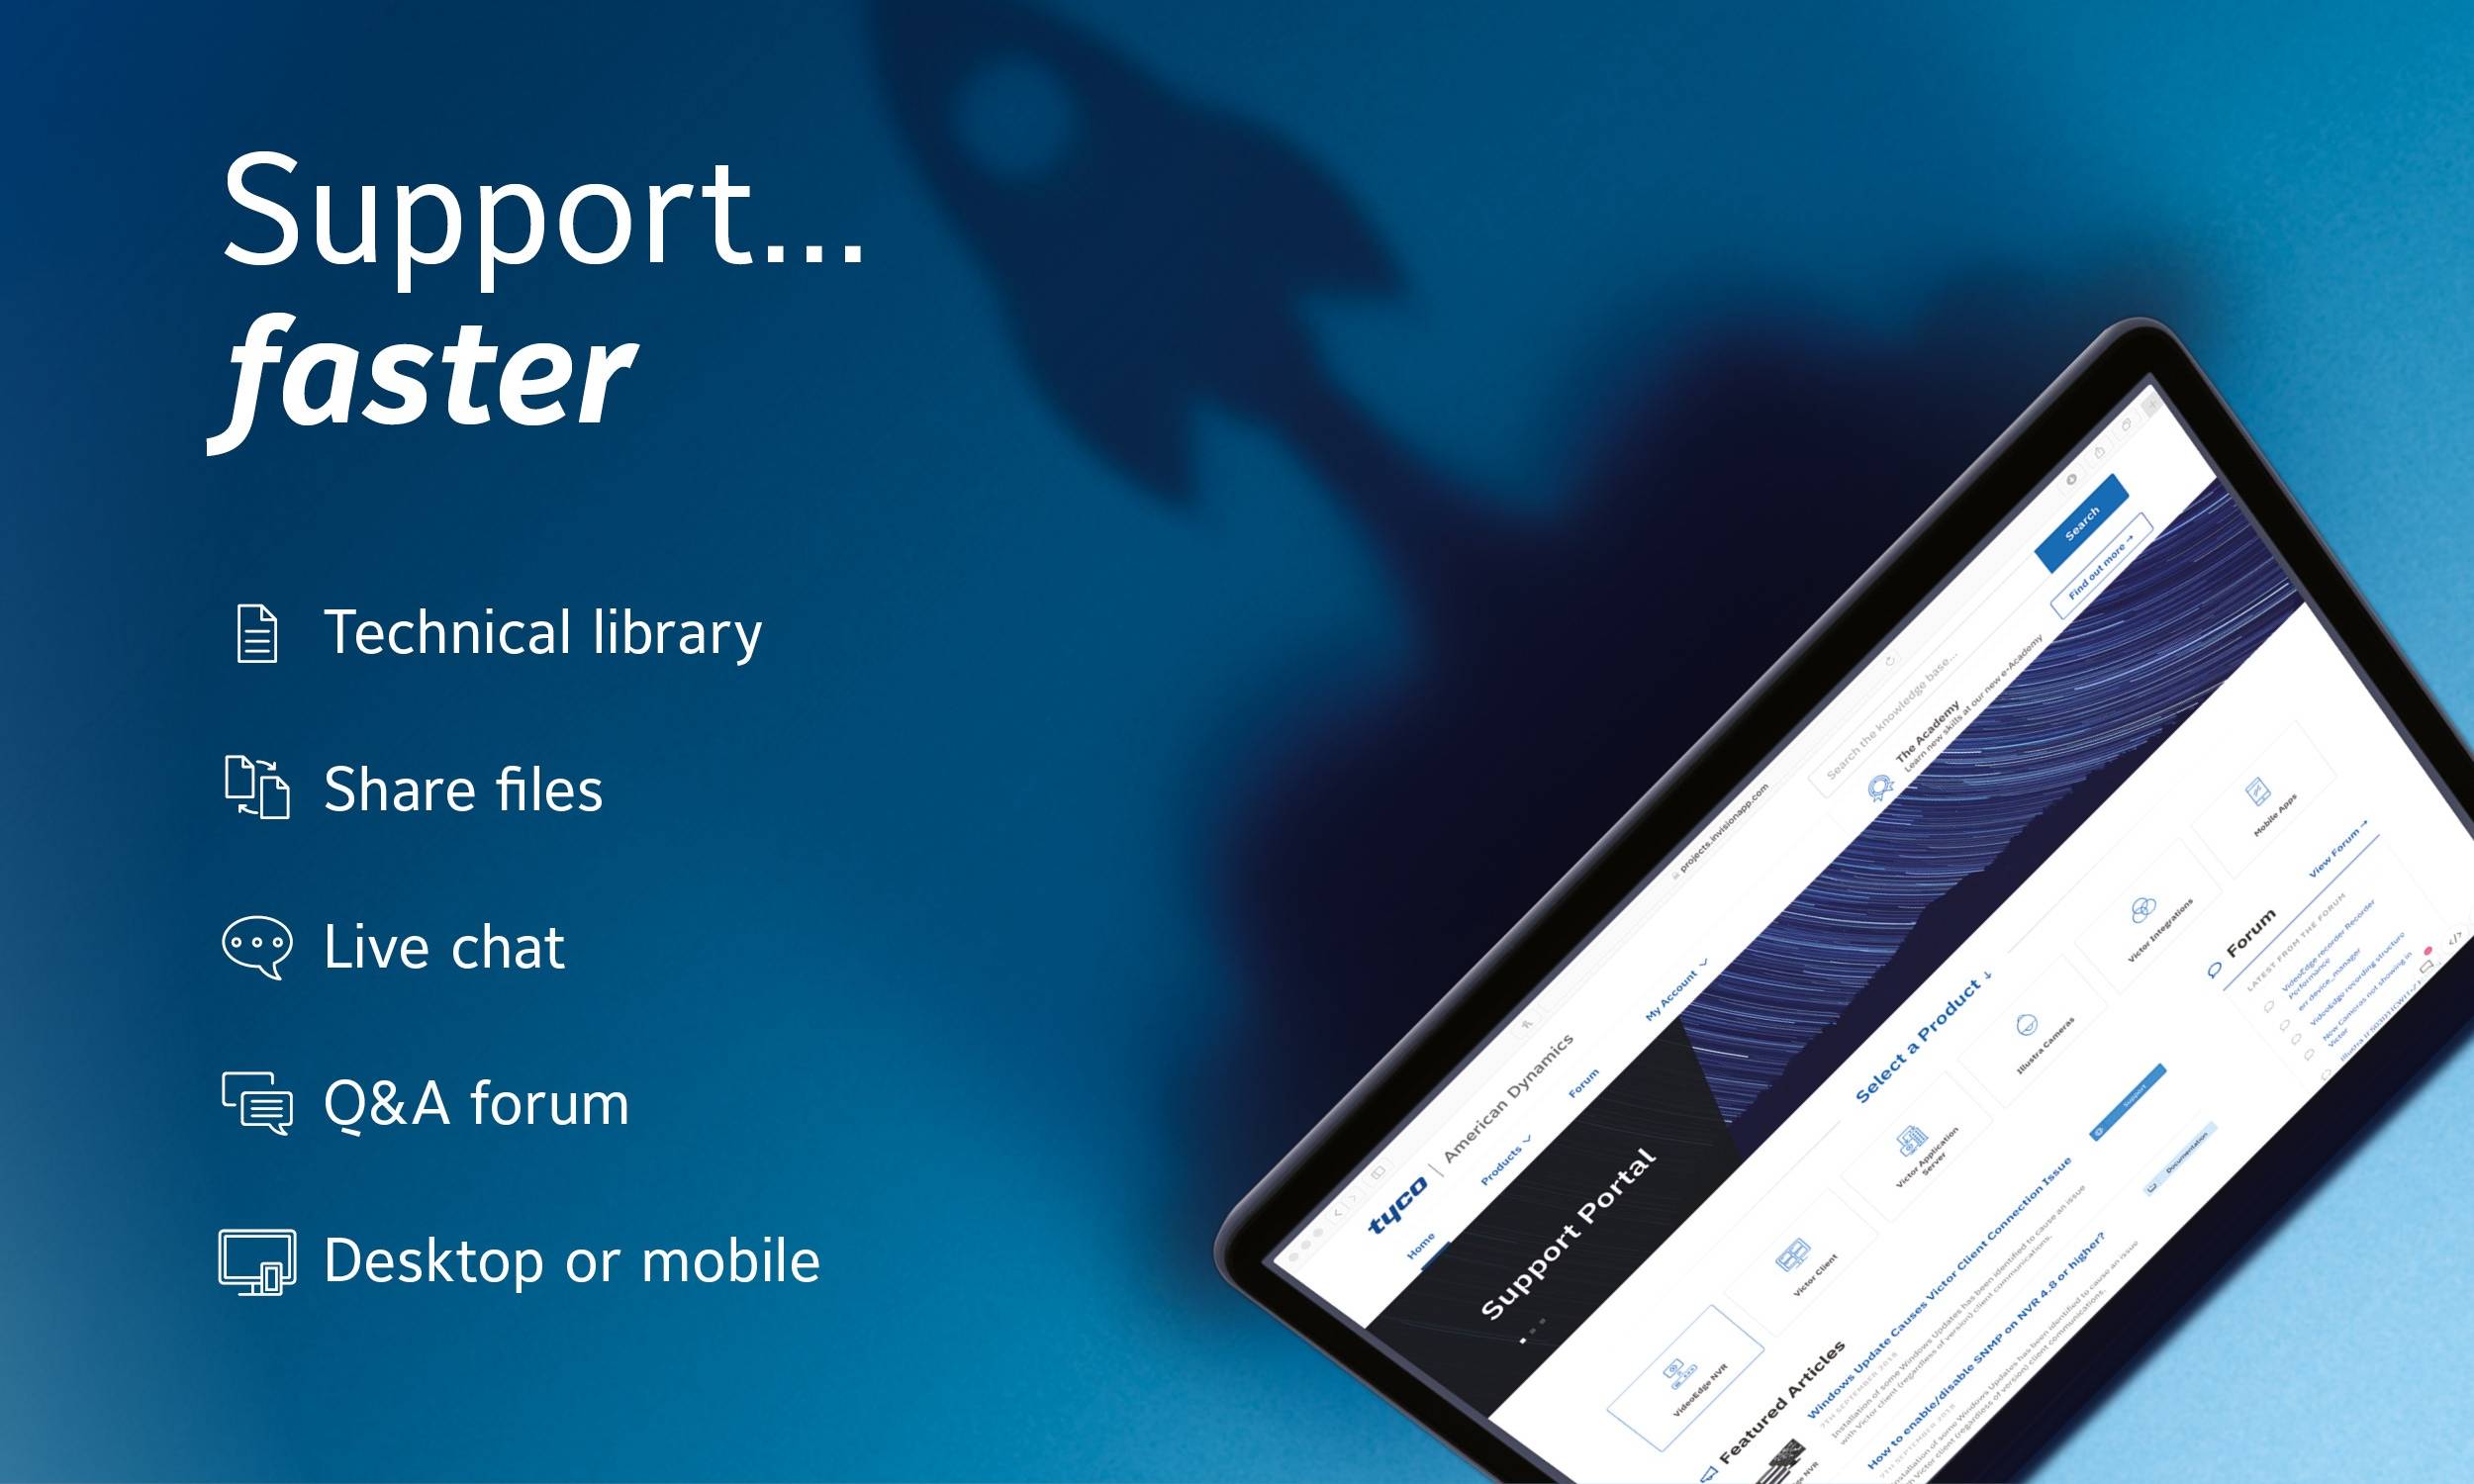 New Tyco video support portal launched